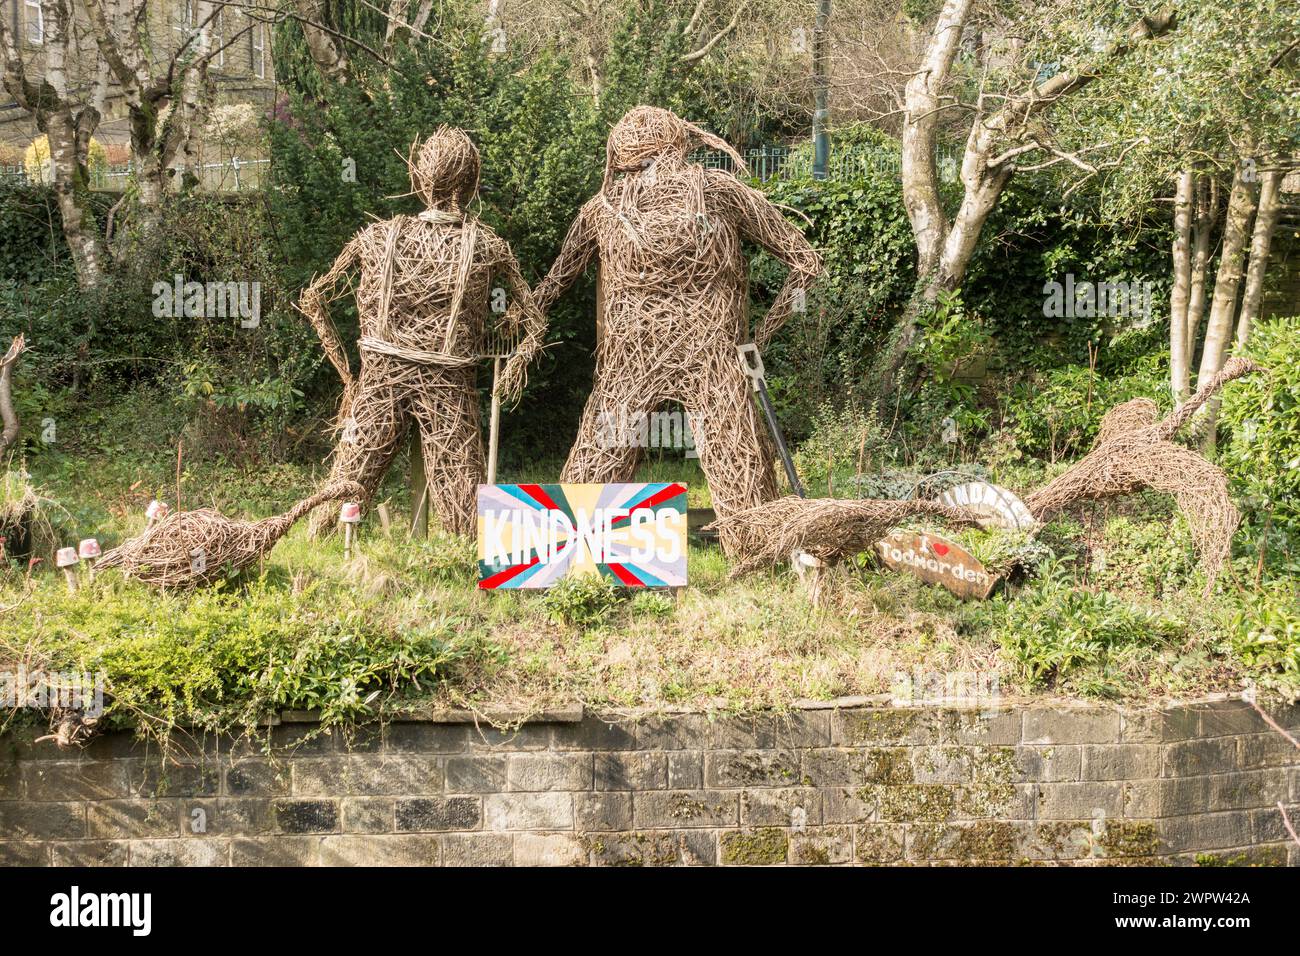 Mr and Mrs Incredible Edible as wicker figures in Todmorden, West Yorkshire, England, UK Stock Photo